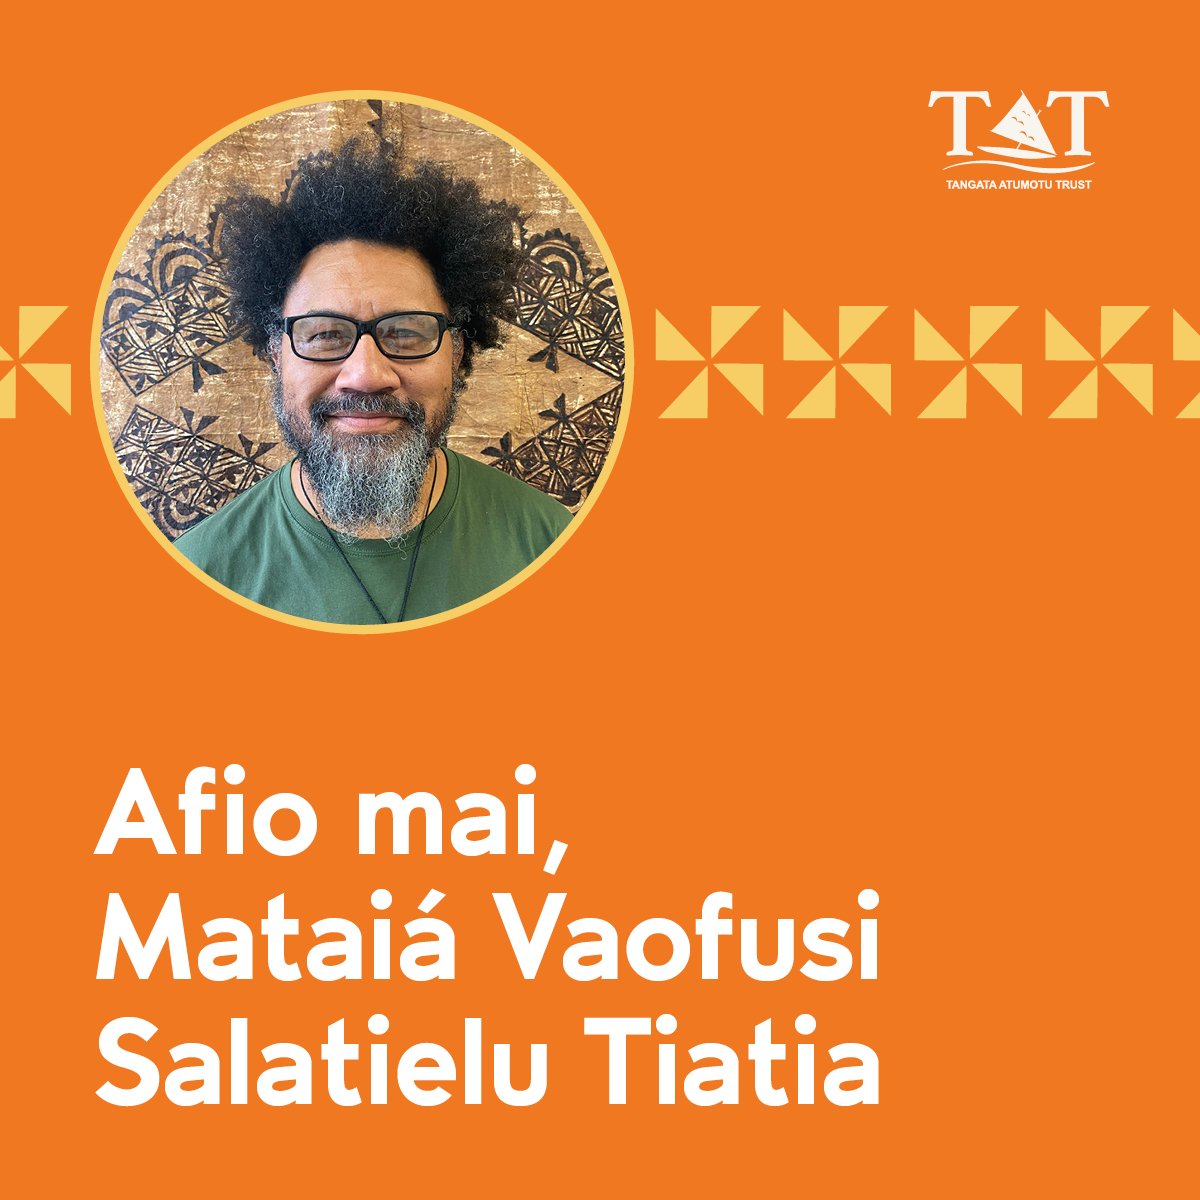 Meet our new team lead for Youth, Navigation and Rural Services! 🛶

Sala was born and raised in Ōtara, Auckland &mdash; a place he also calls the &ldquo;biggest village of Western Samoa&quot;. 

Now focused on serving our Pasifika community here in 